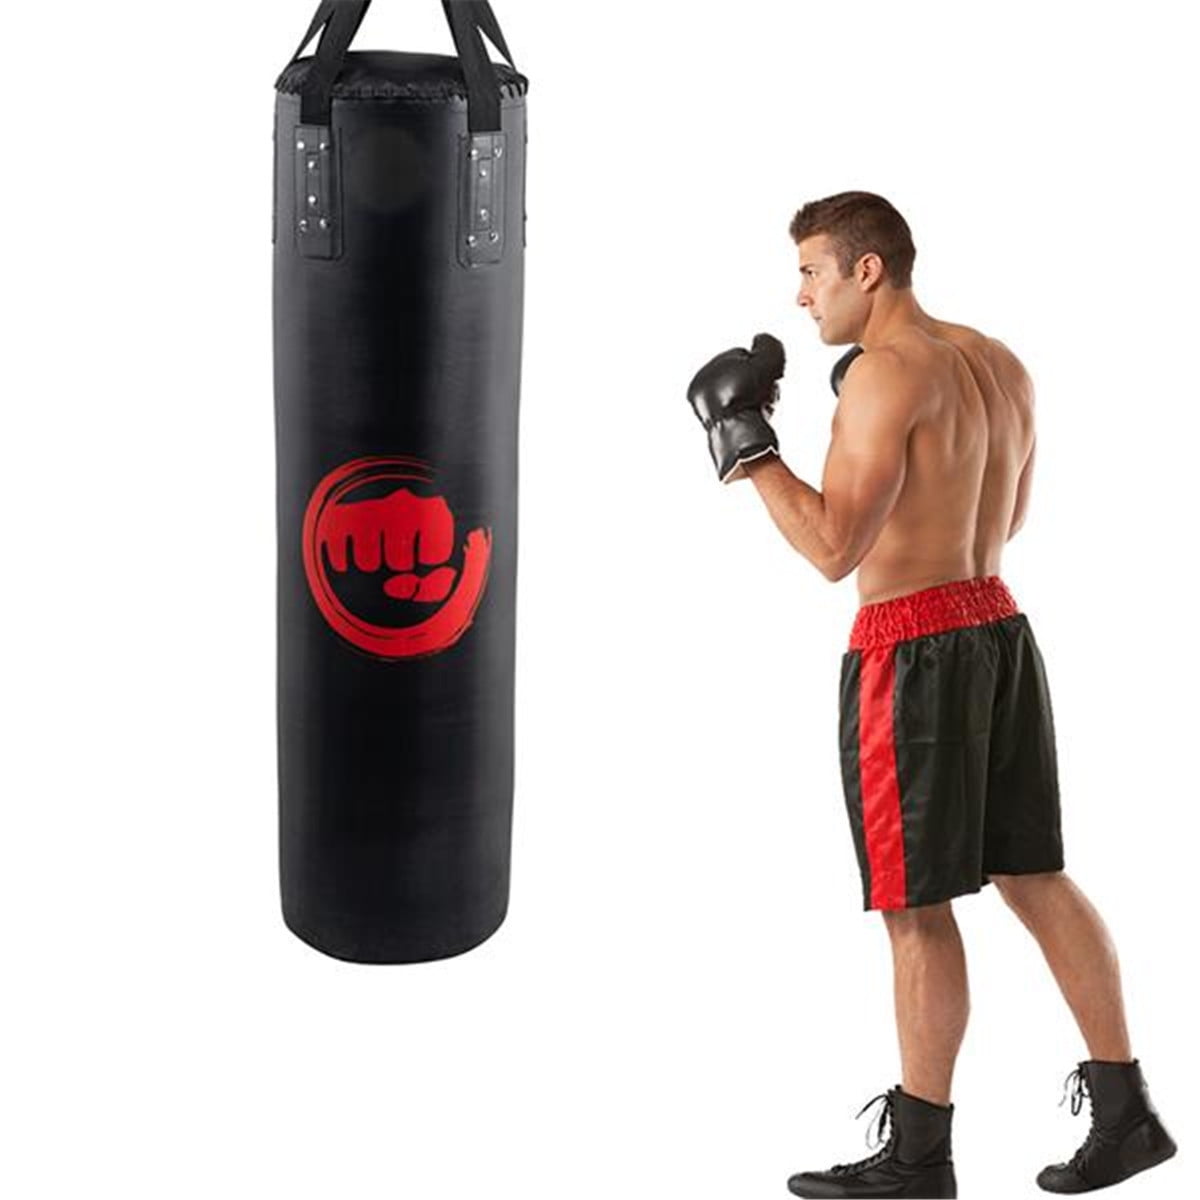 New Punch Bag Filled Heavy Duty Boxing Gloves Buyer Build MMA Material Arts Set 